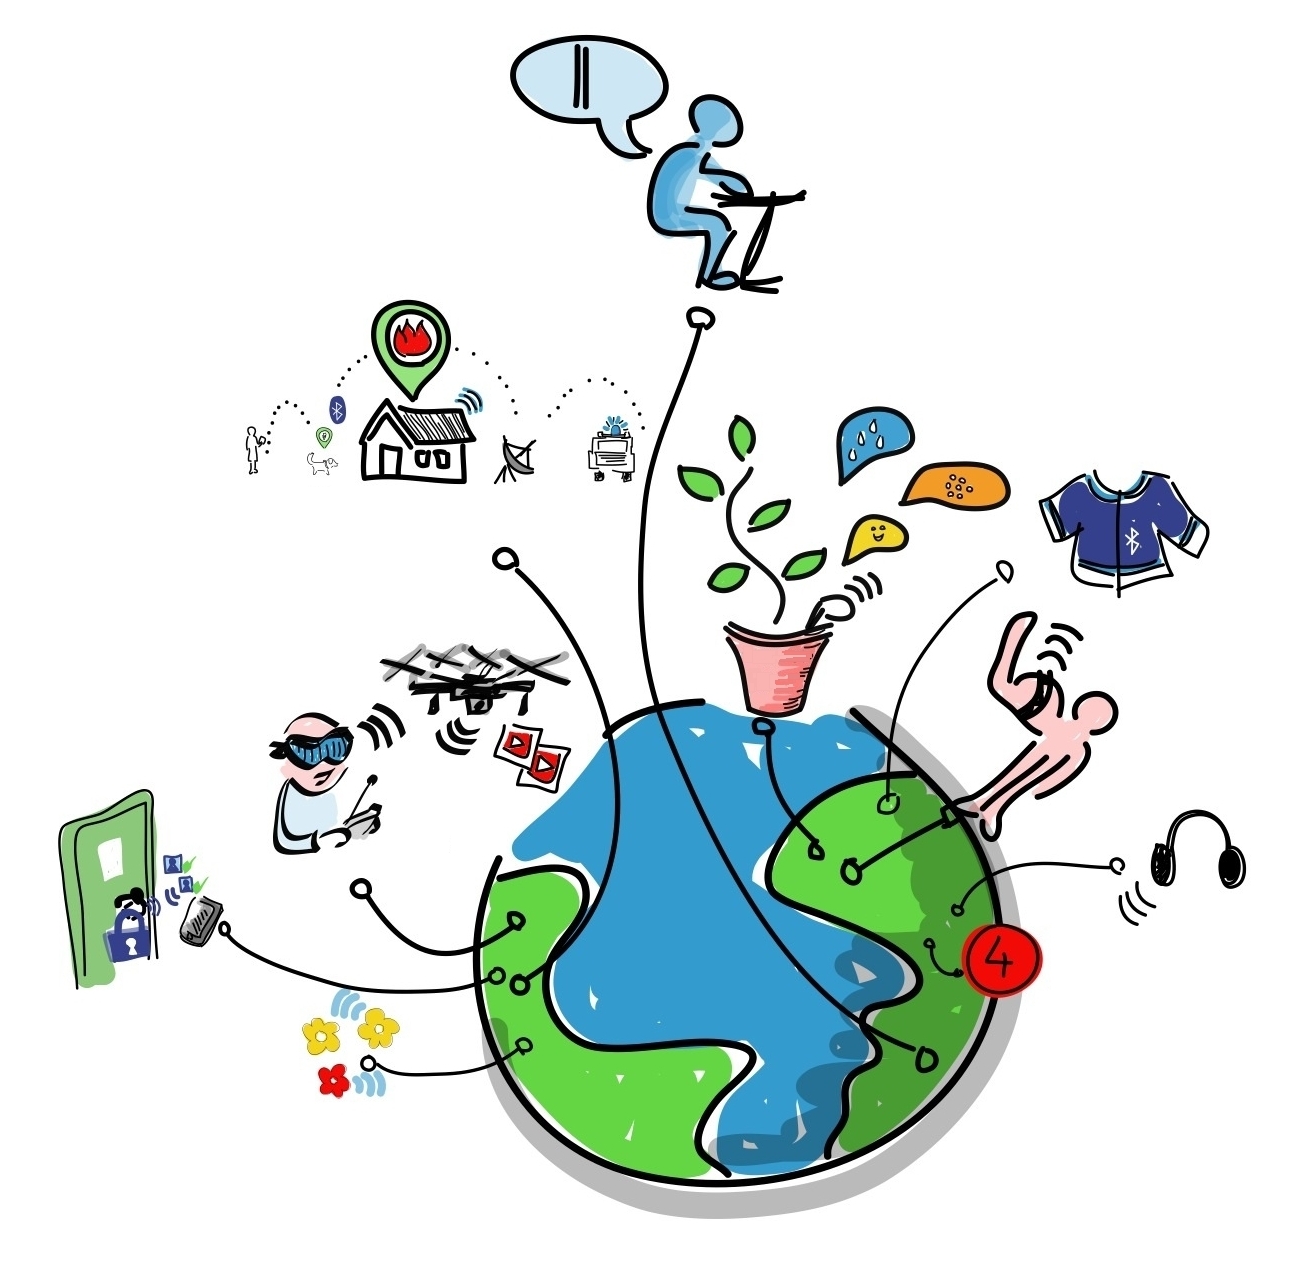 Internet of Things - (source: Open Educational Resource - OER)